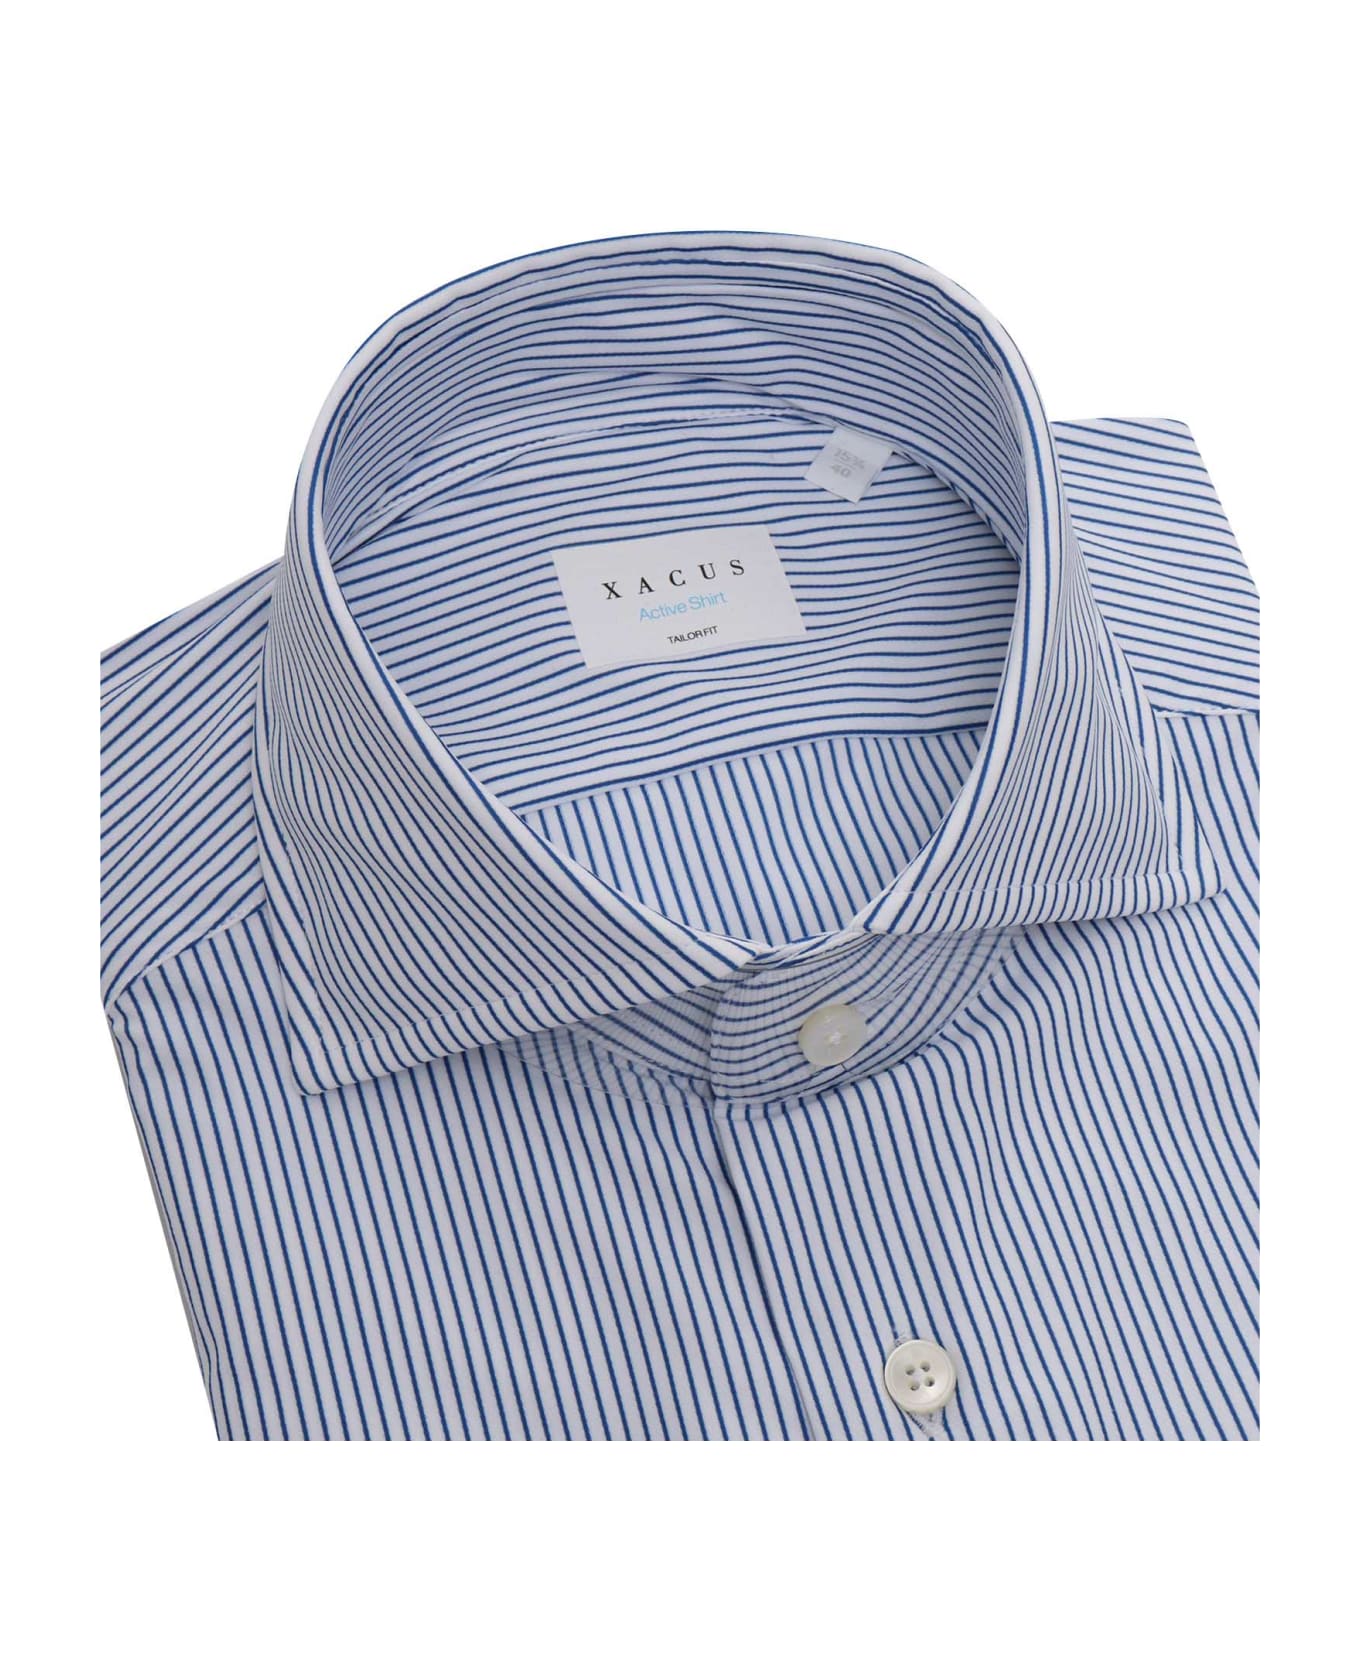 Xacus Light Blue Shirt With Stripes - MULTICOLOR